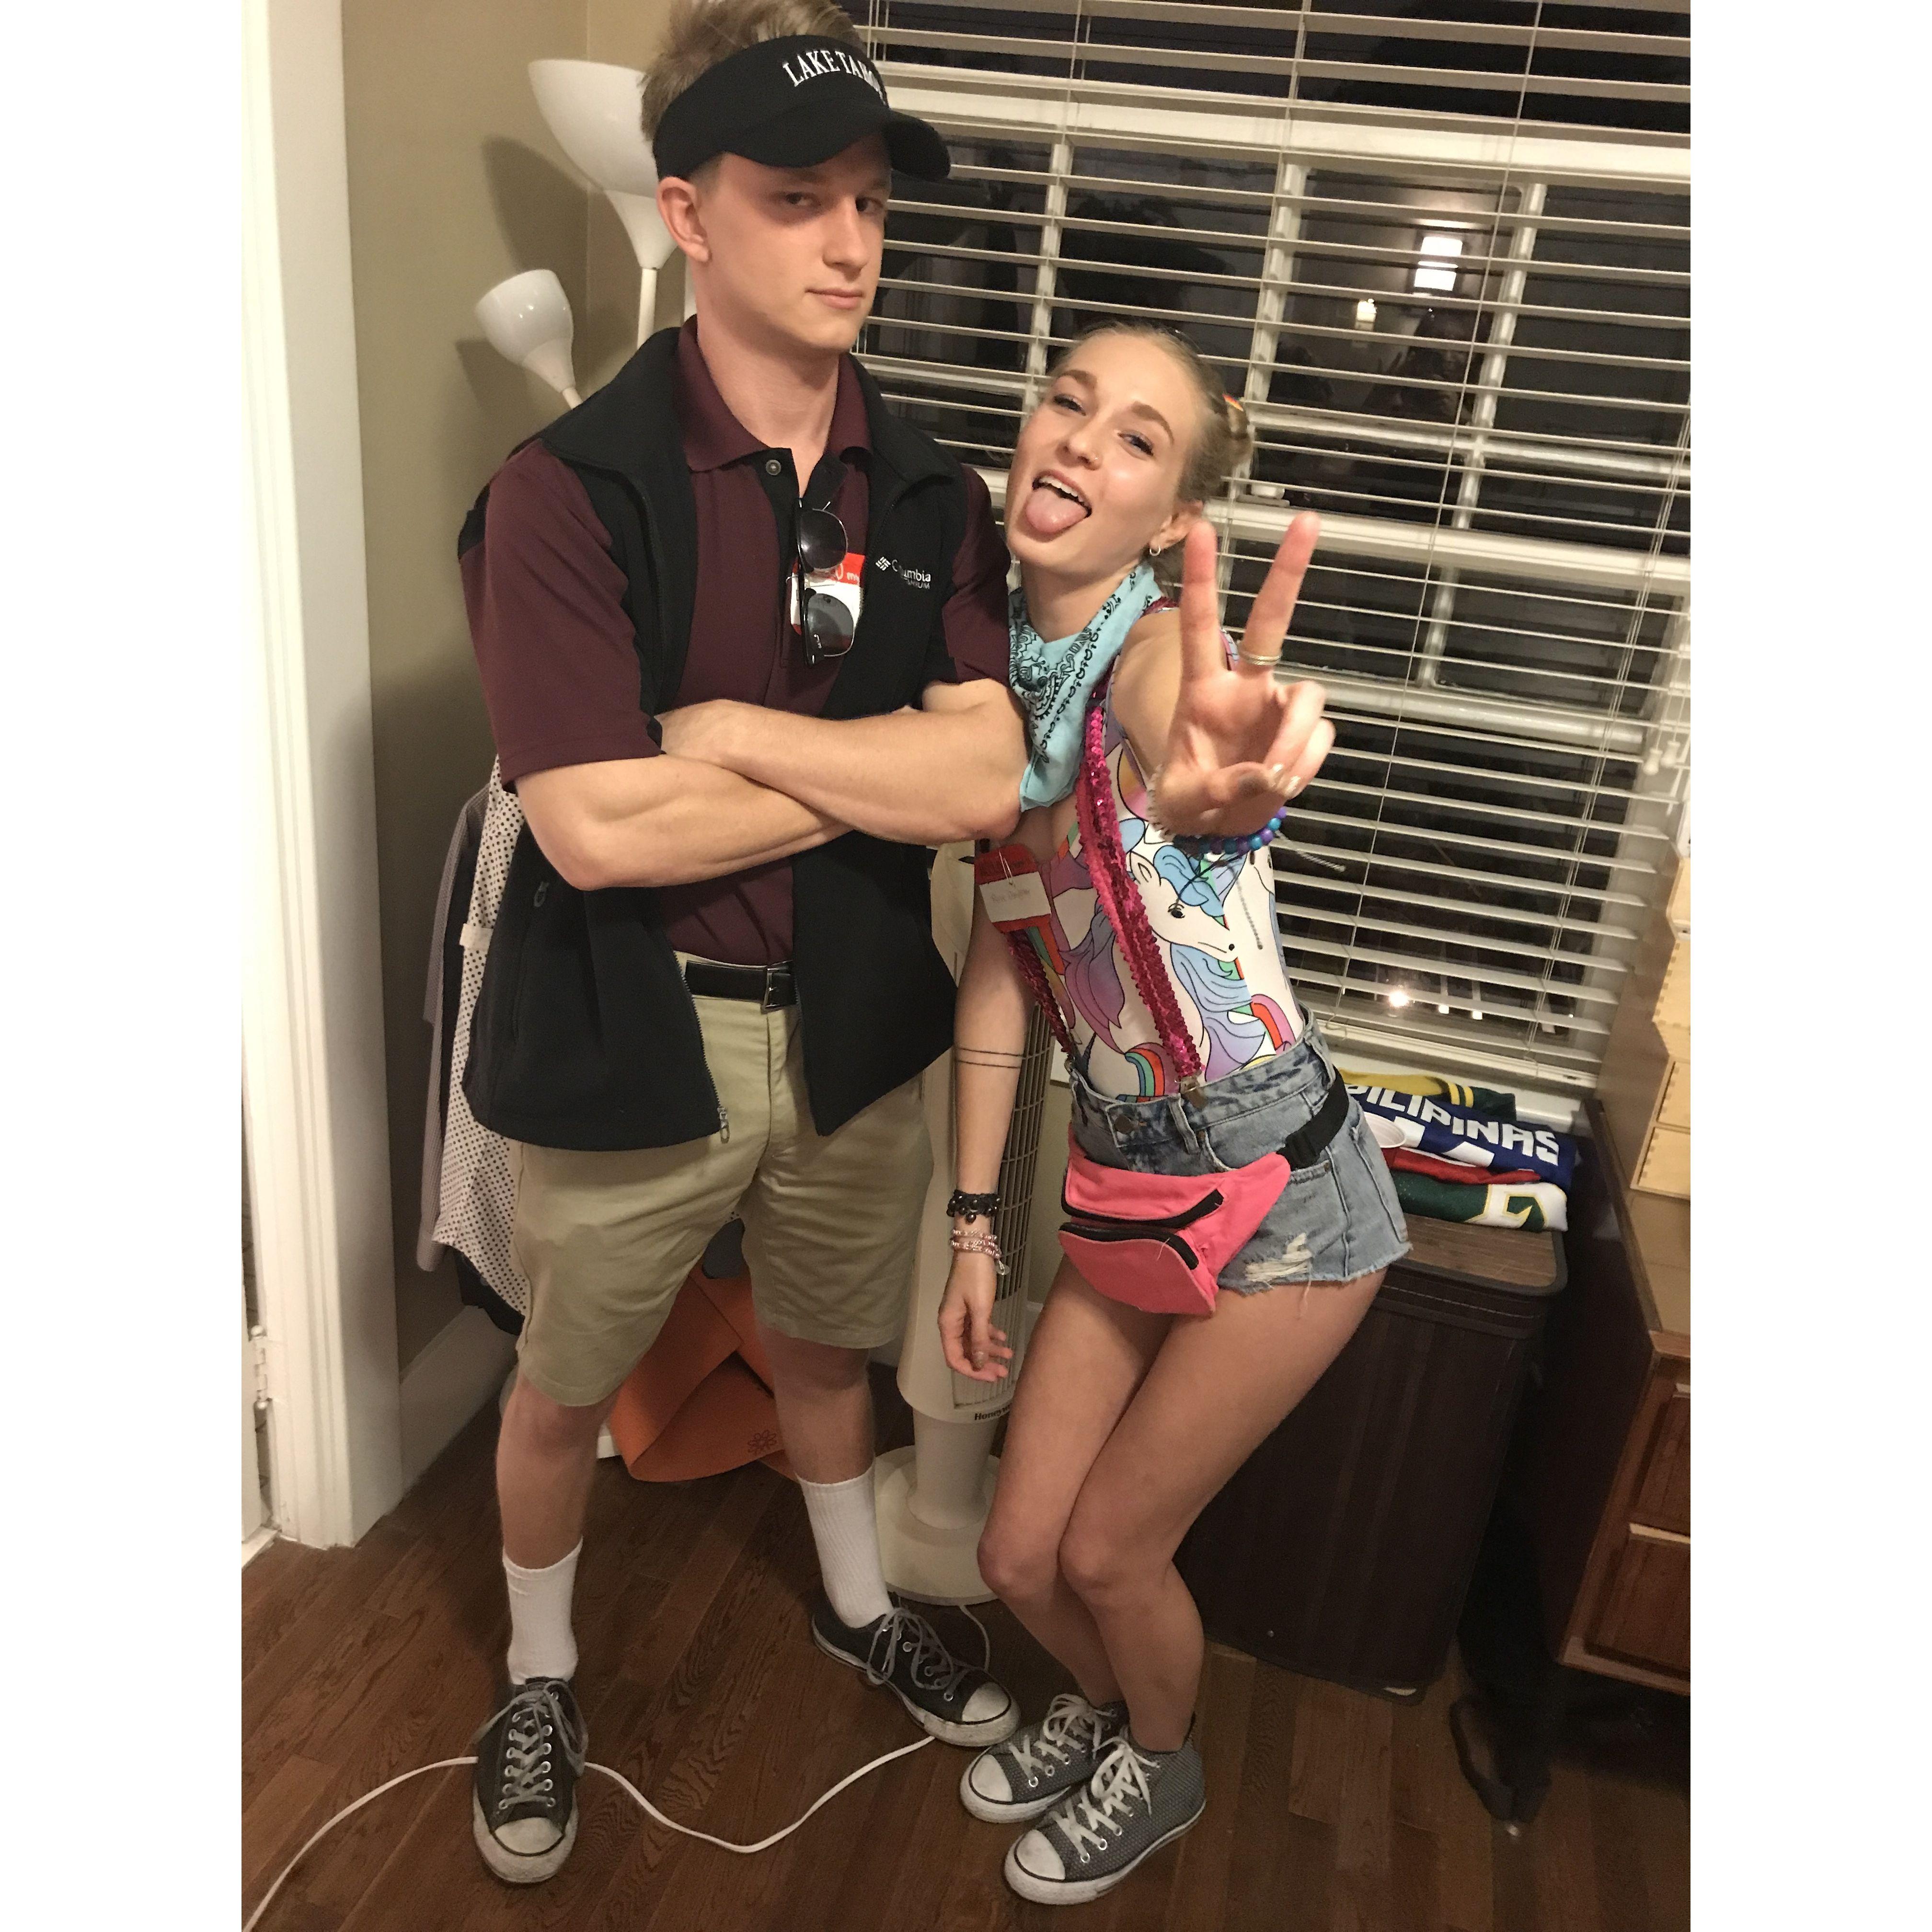 Oct 2017 | First Couple's Costume - 'Rave Daughter & Disappointed Father'